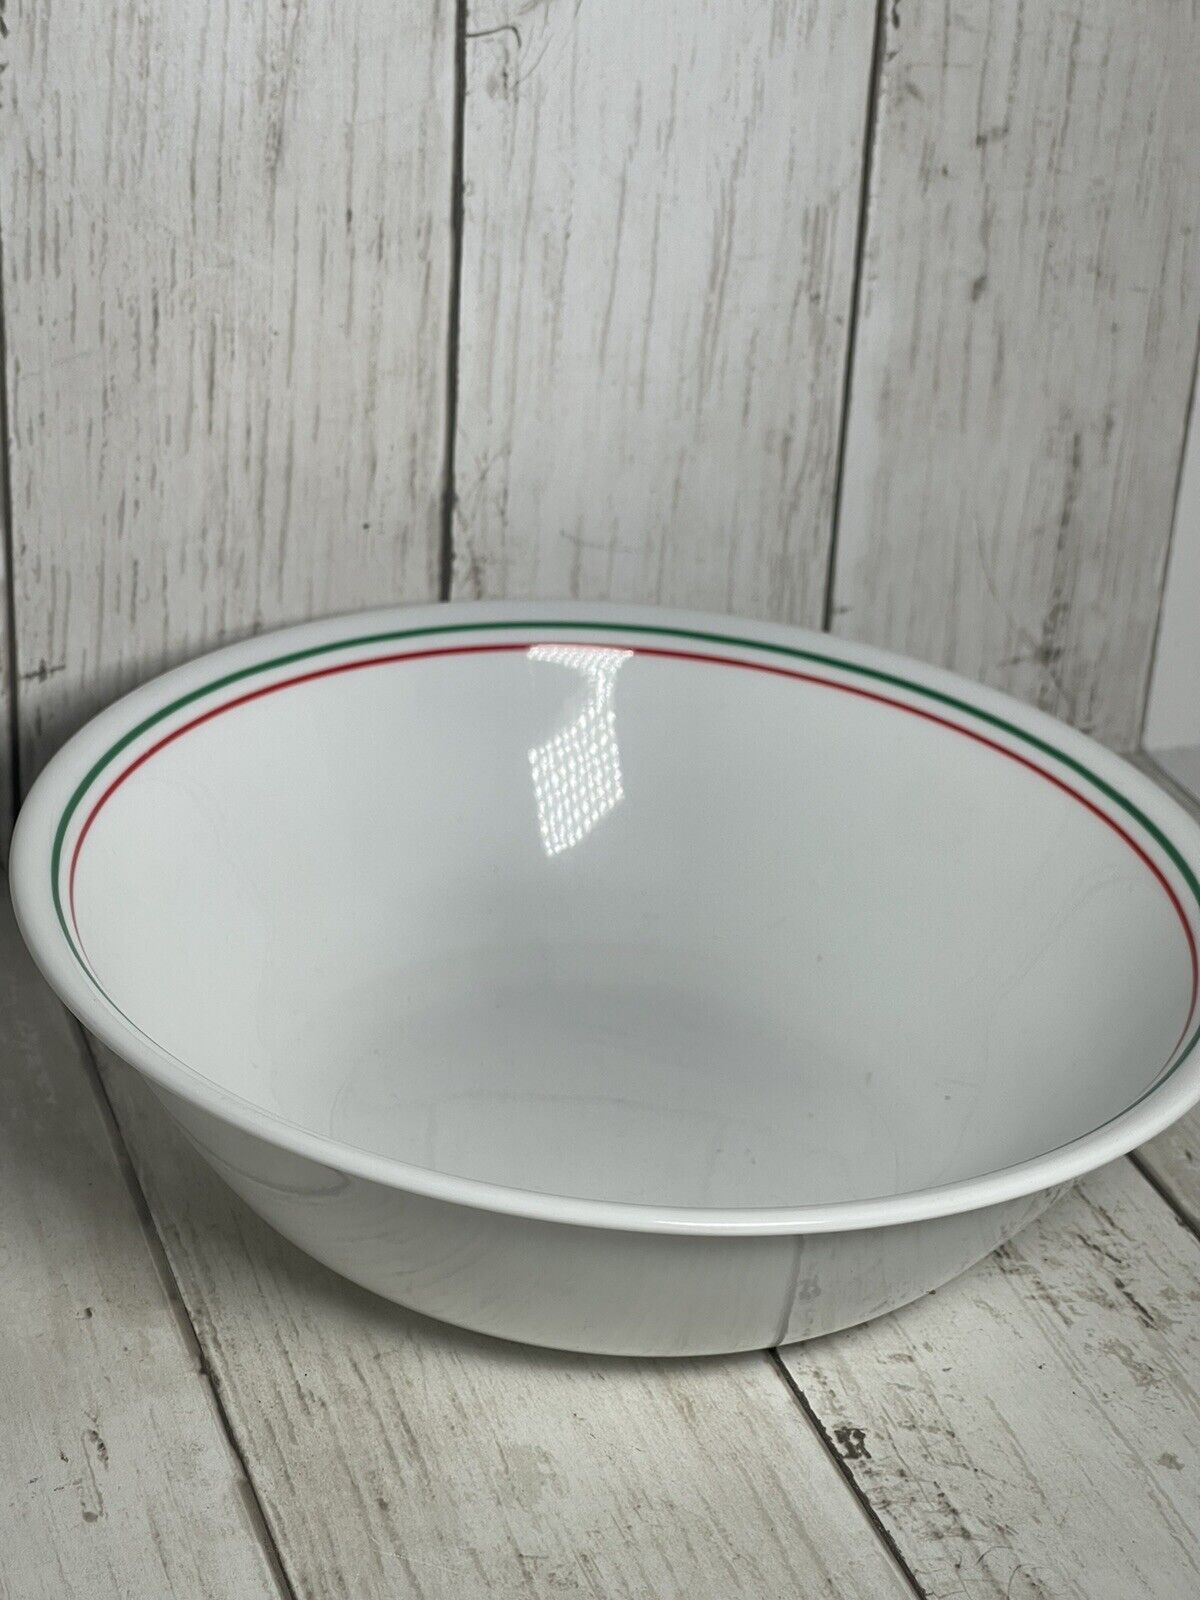 Vintage Corning Corelle WINTER HOLLY DAYS Christmas Serving Bowl 8-1/2\